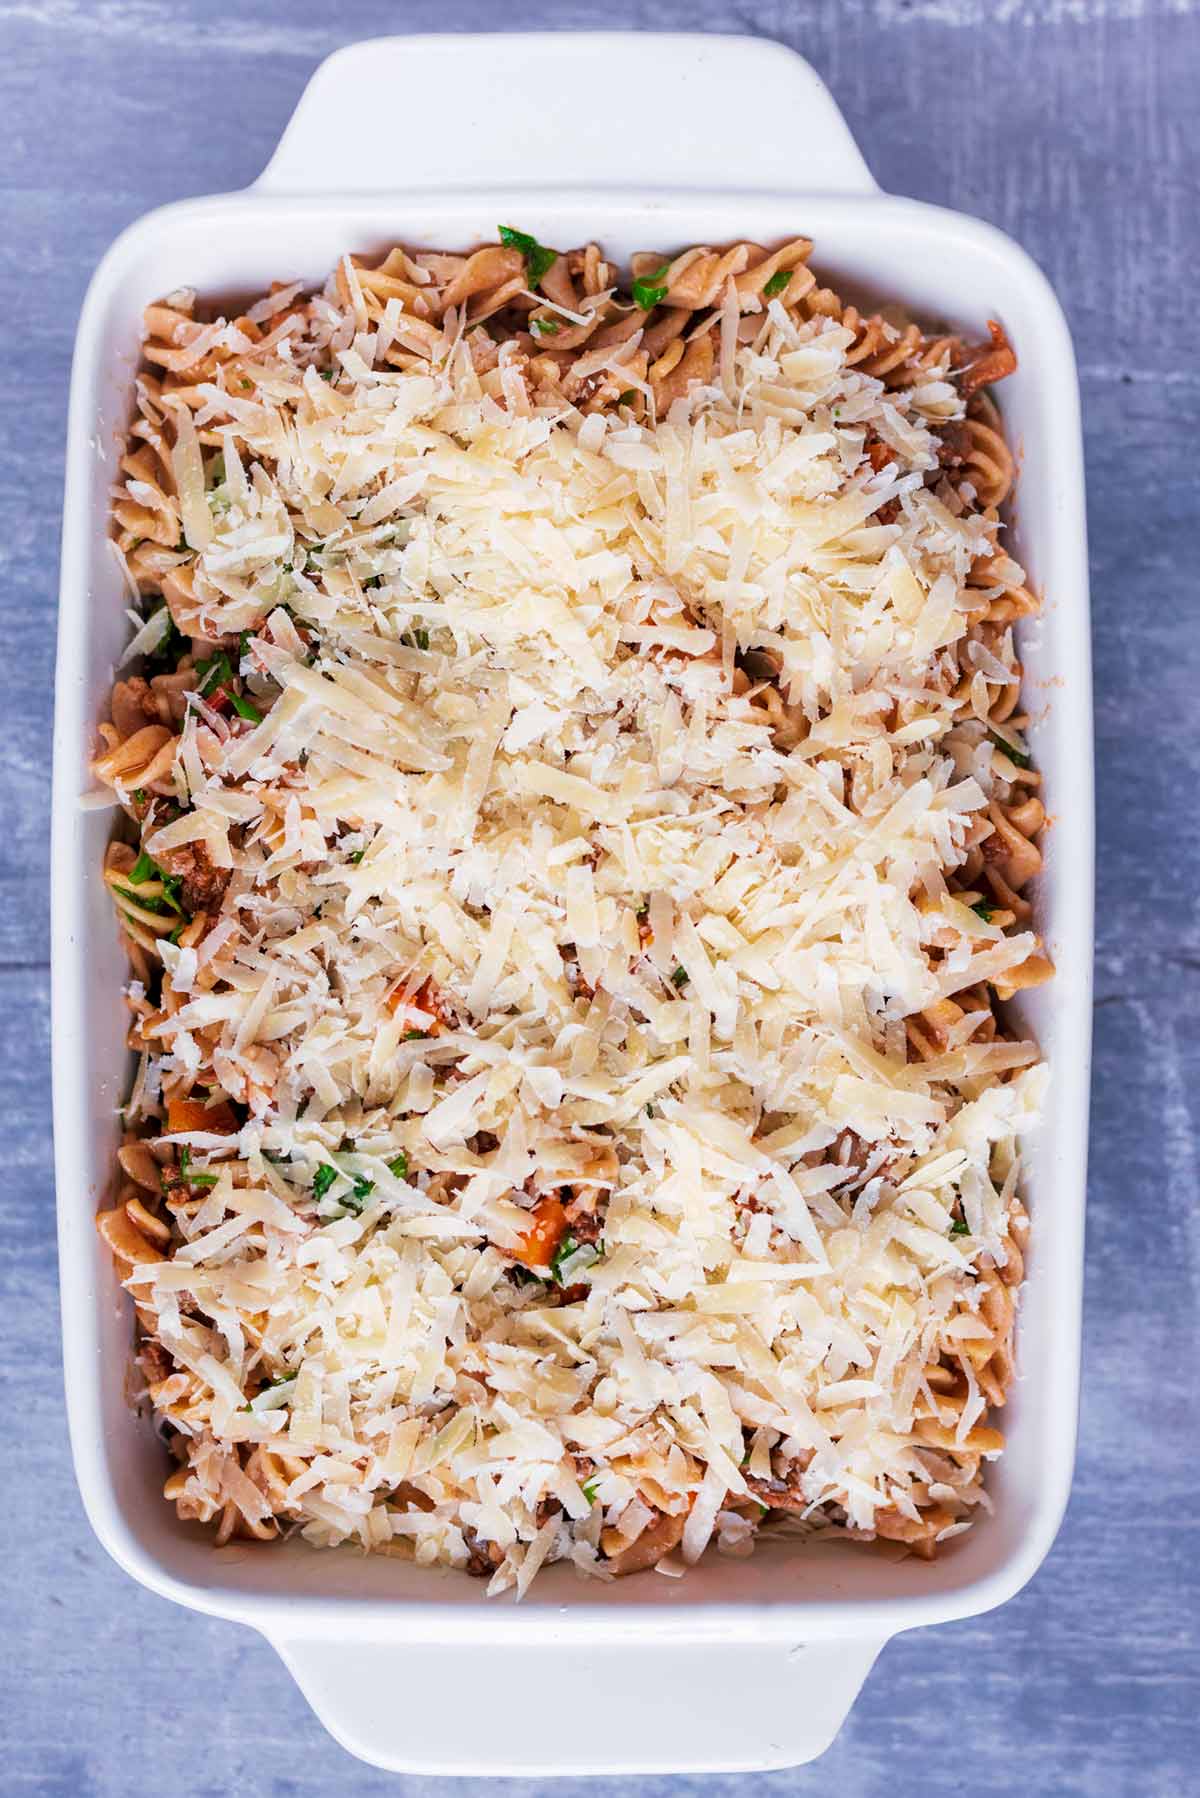 Pasta bolognese in a baking dish covered in grated cheese.